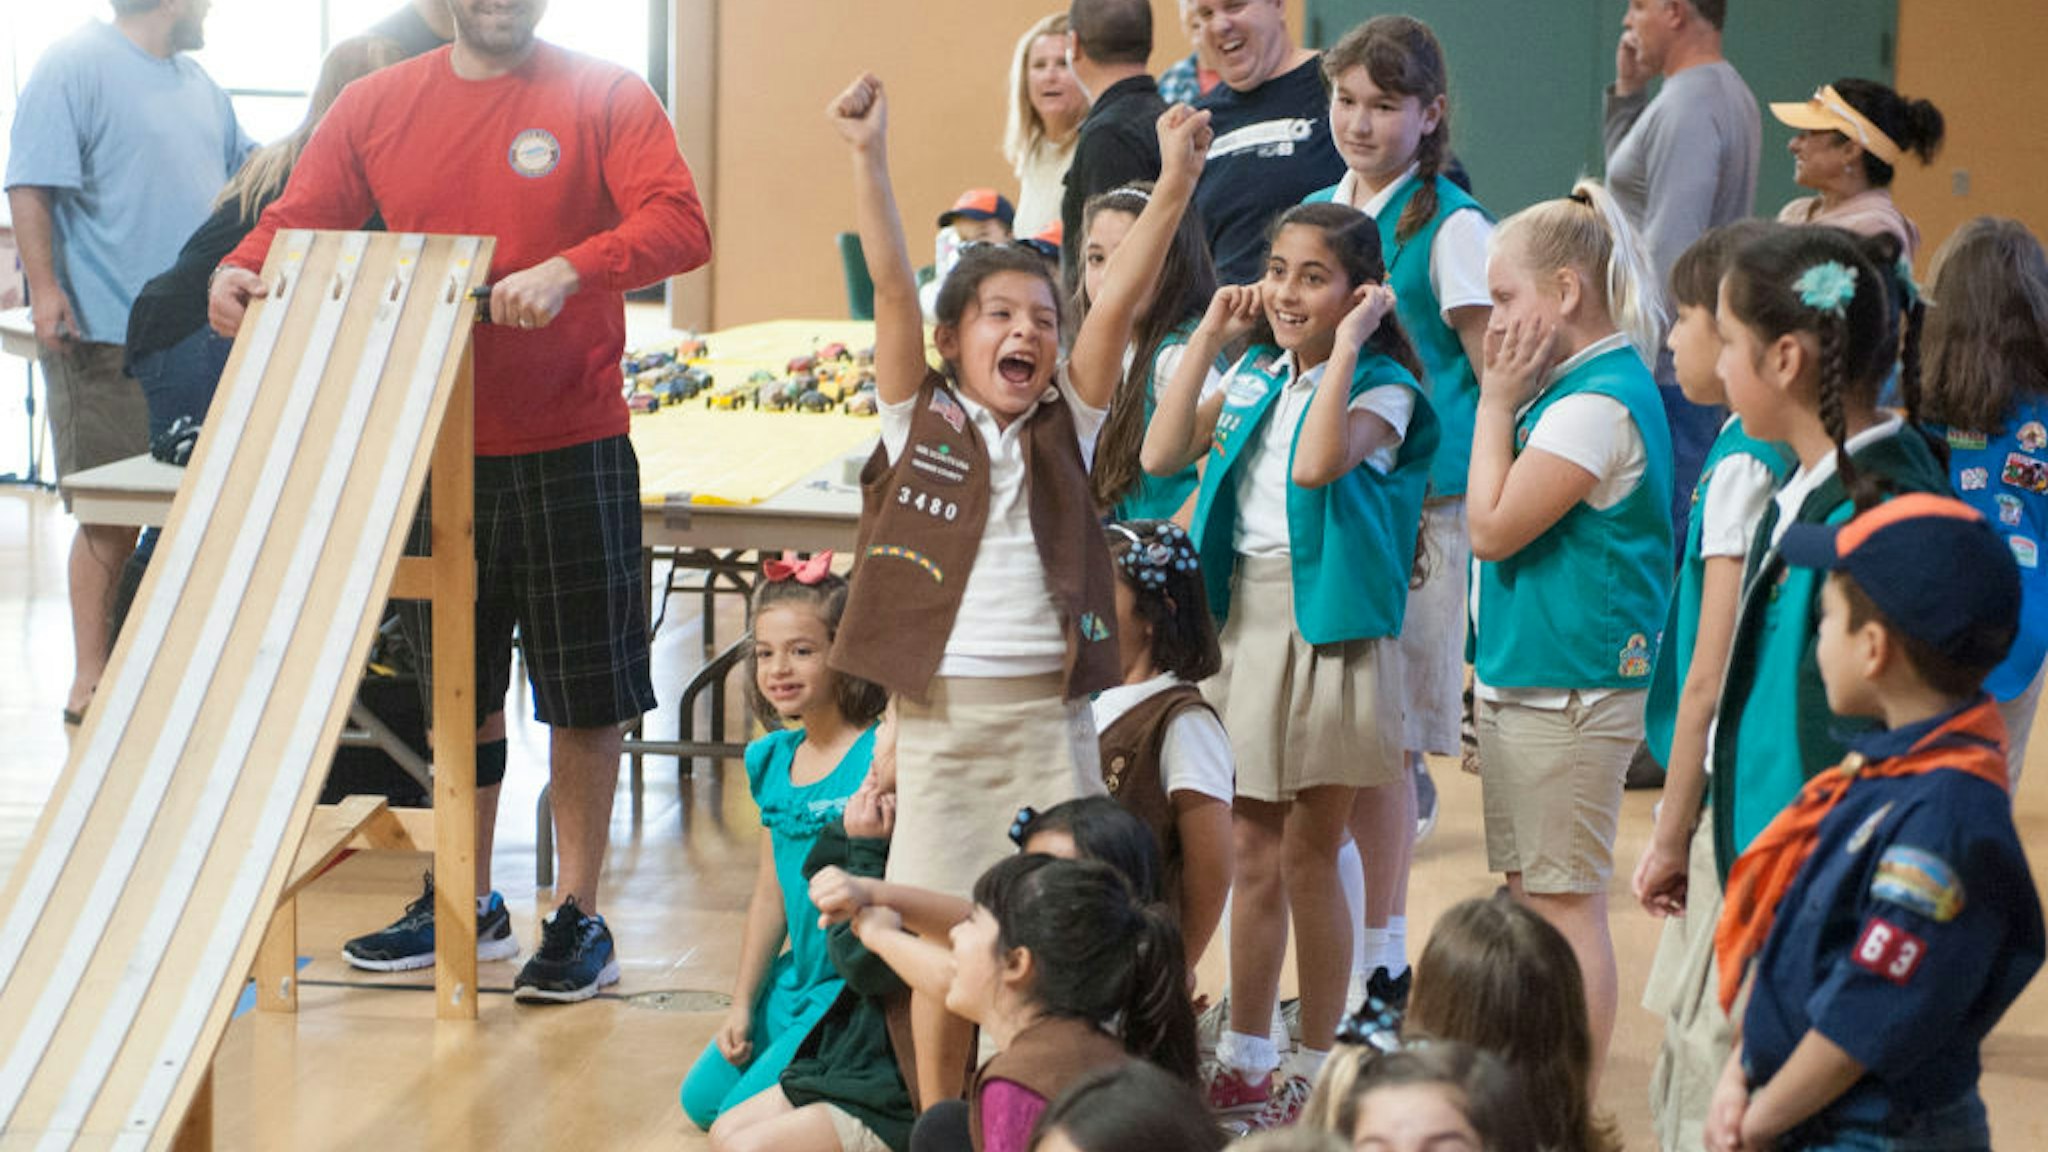 Starter Elyas Balta, at left, smiles as a Girl Scout celebrates an early victory at the combined Cub Scout/Girl Scout Pinewood Derby races at St. Norbert Catholic School in Orange Saturday.